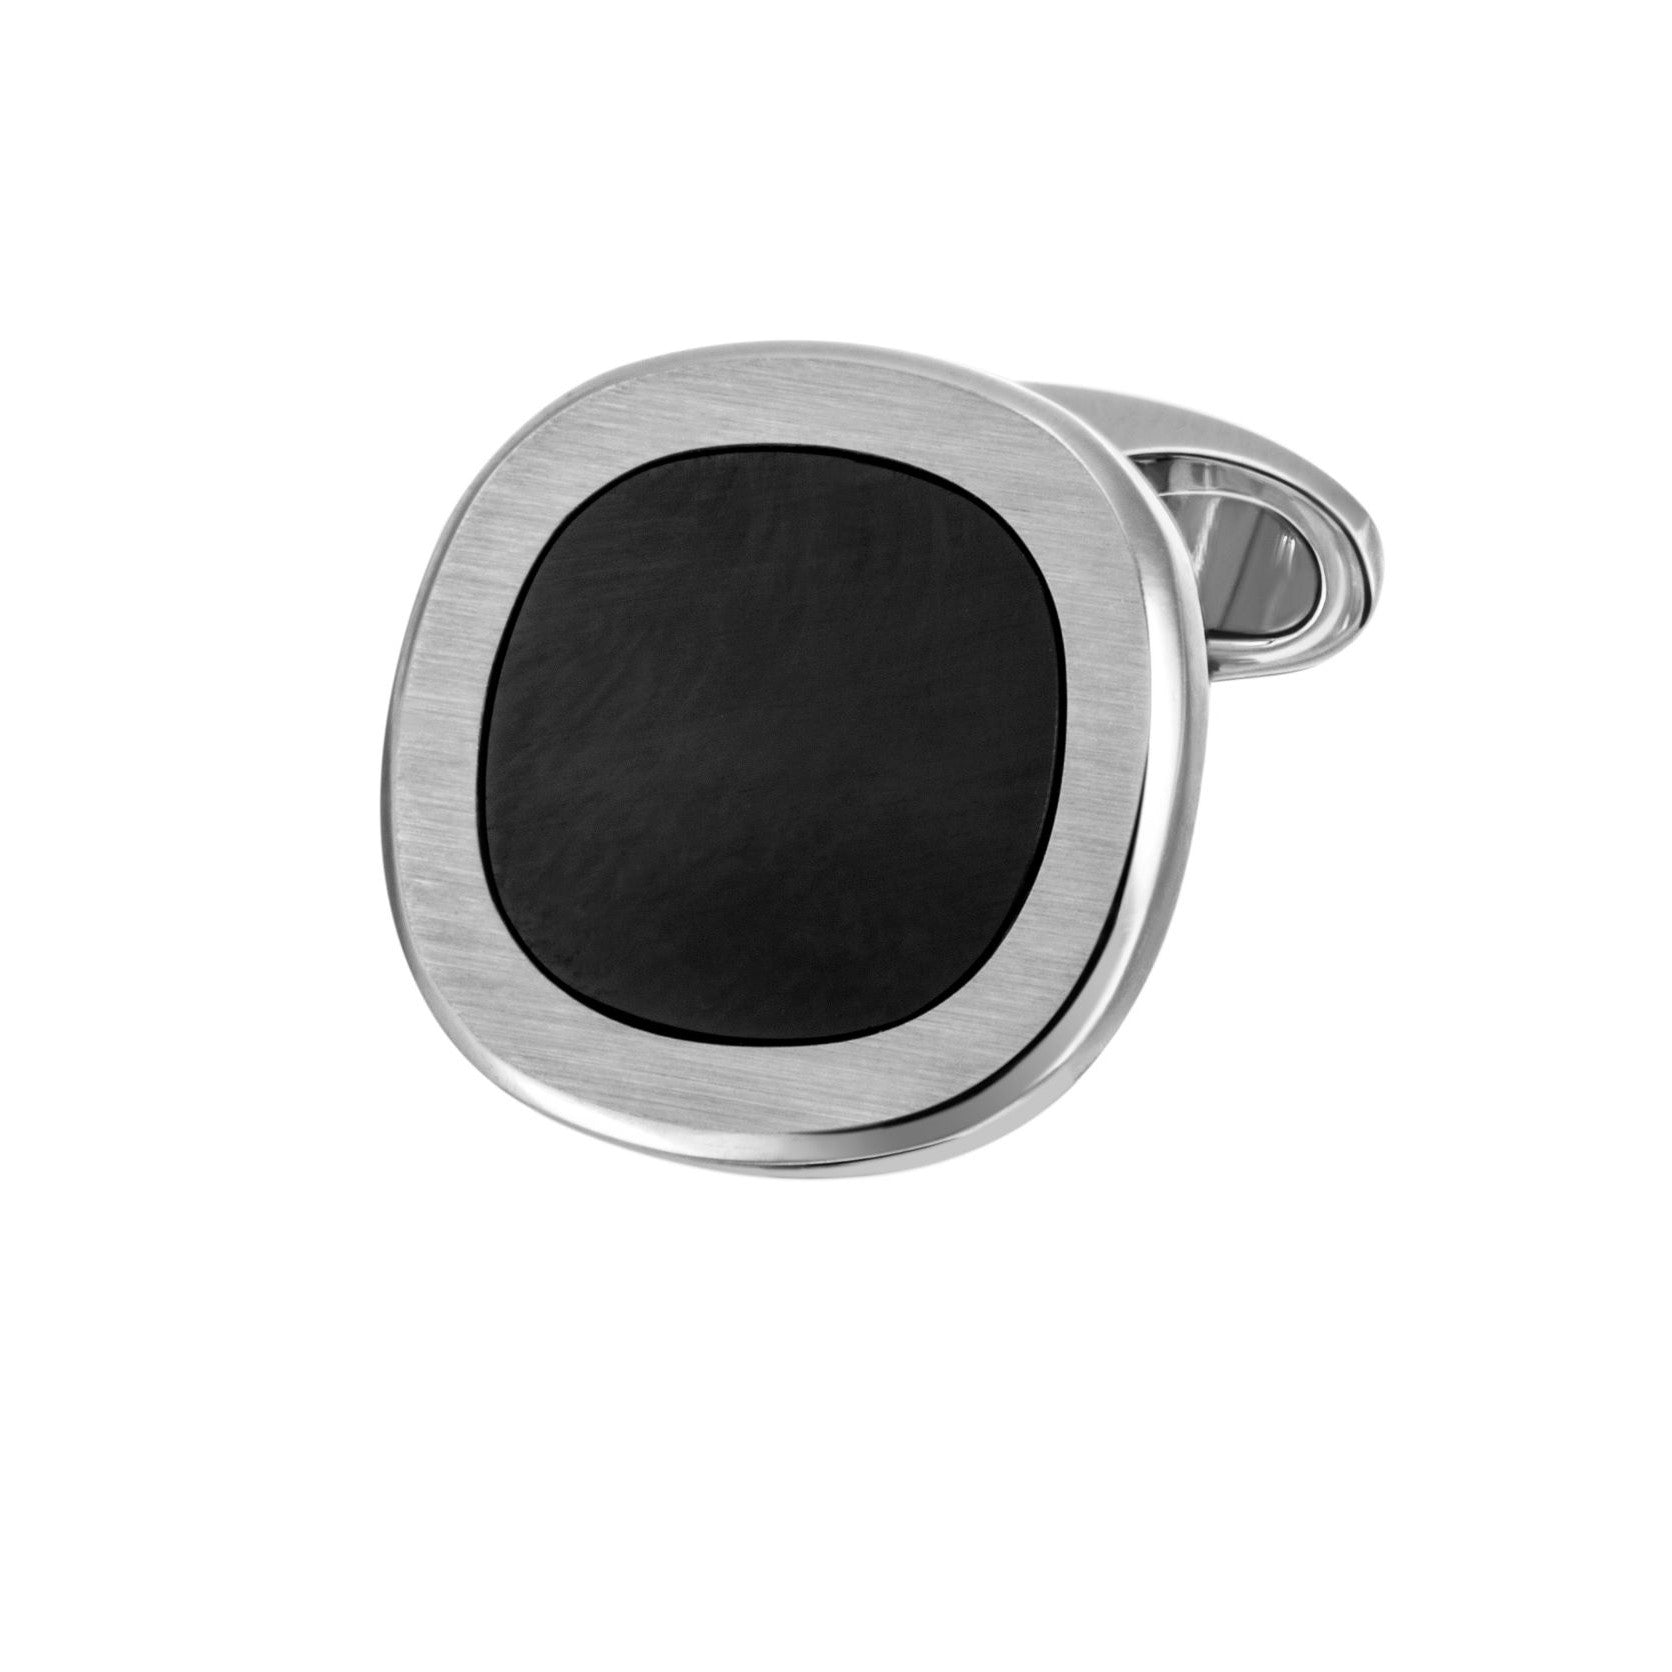 WATCH OUT!!! 18ct WHITE GOLD CUFFLINKS